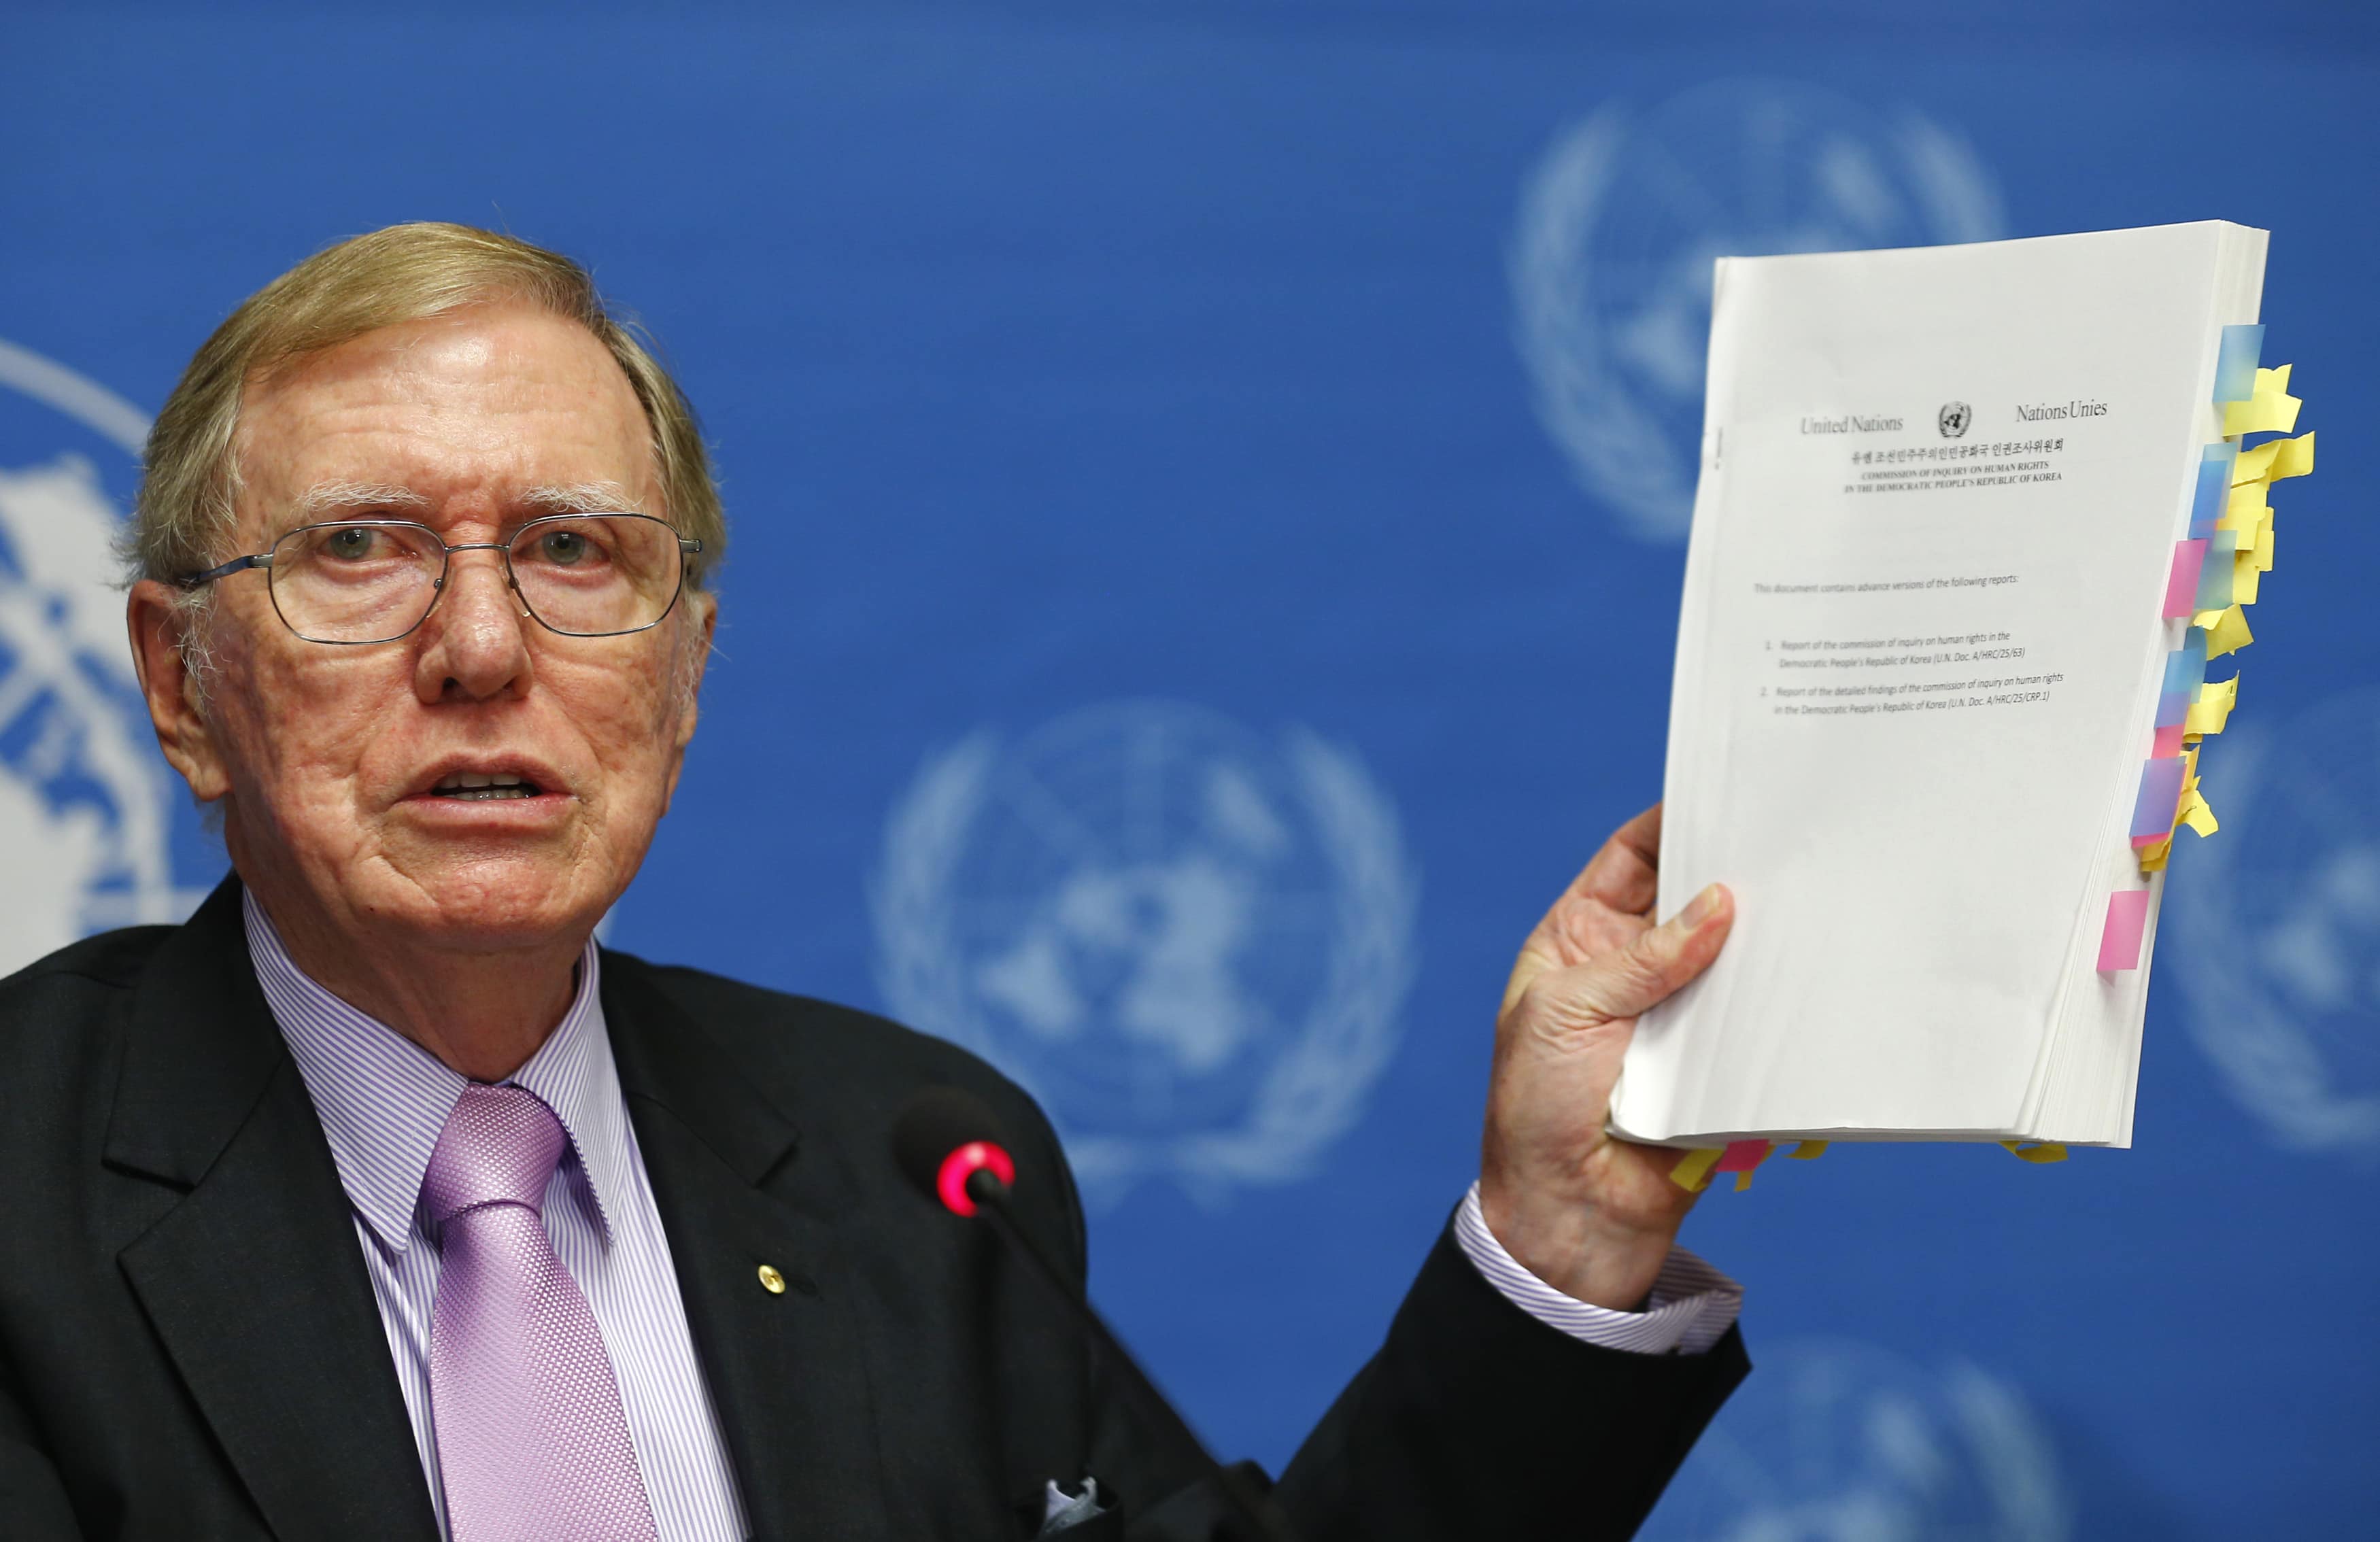 Michael Kirby, Chairperson of the Commission of Inquiry on Human Rights in North Korea, holds a copy of his report during a news conference at the United Nations in Geneva, 17 February 2014, REUTERS/Denis Balibouse